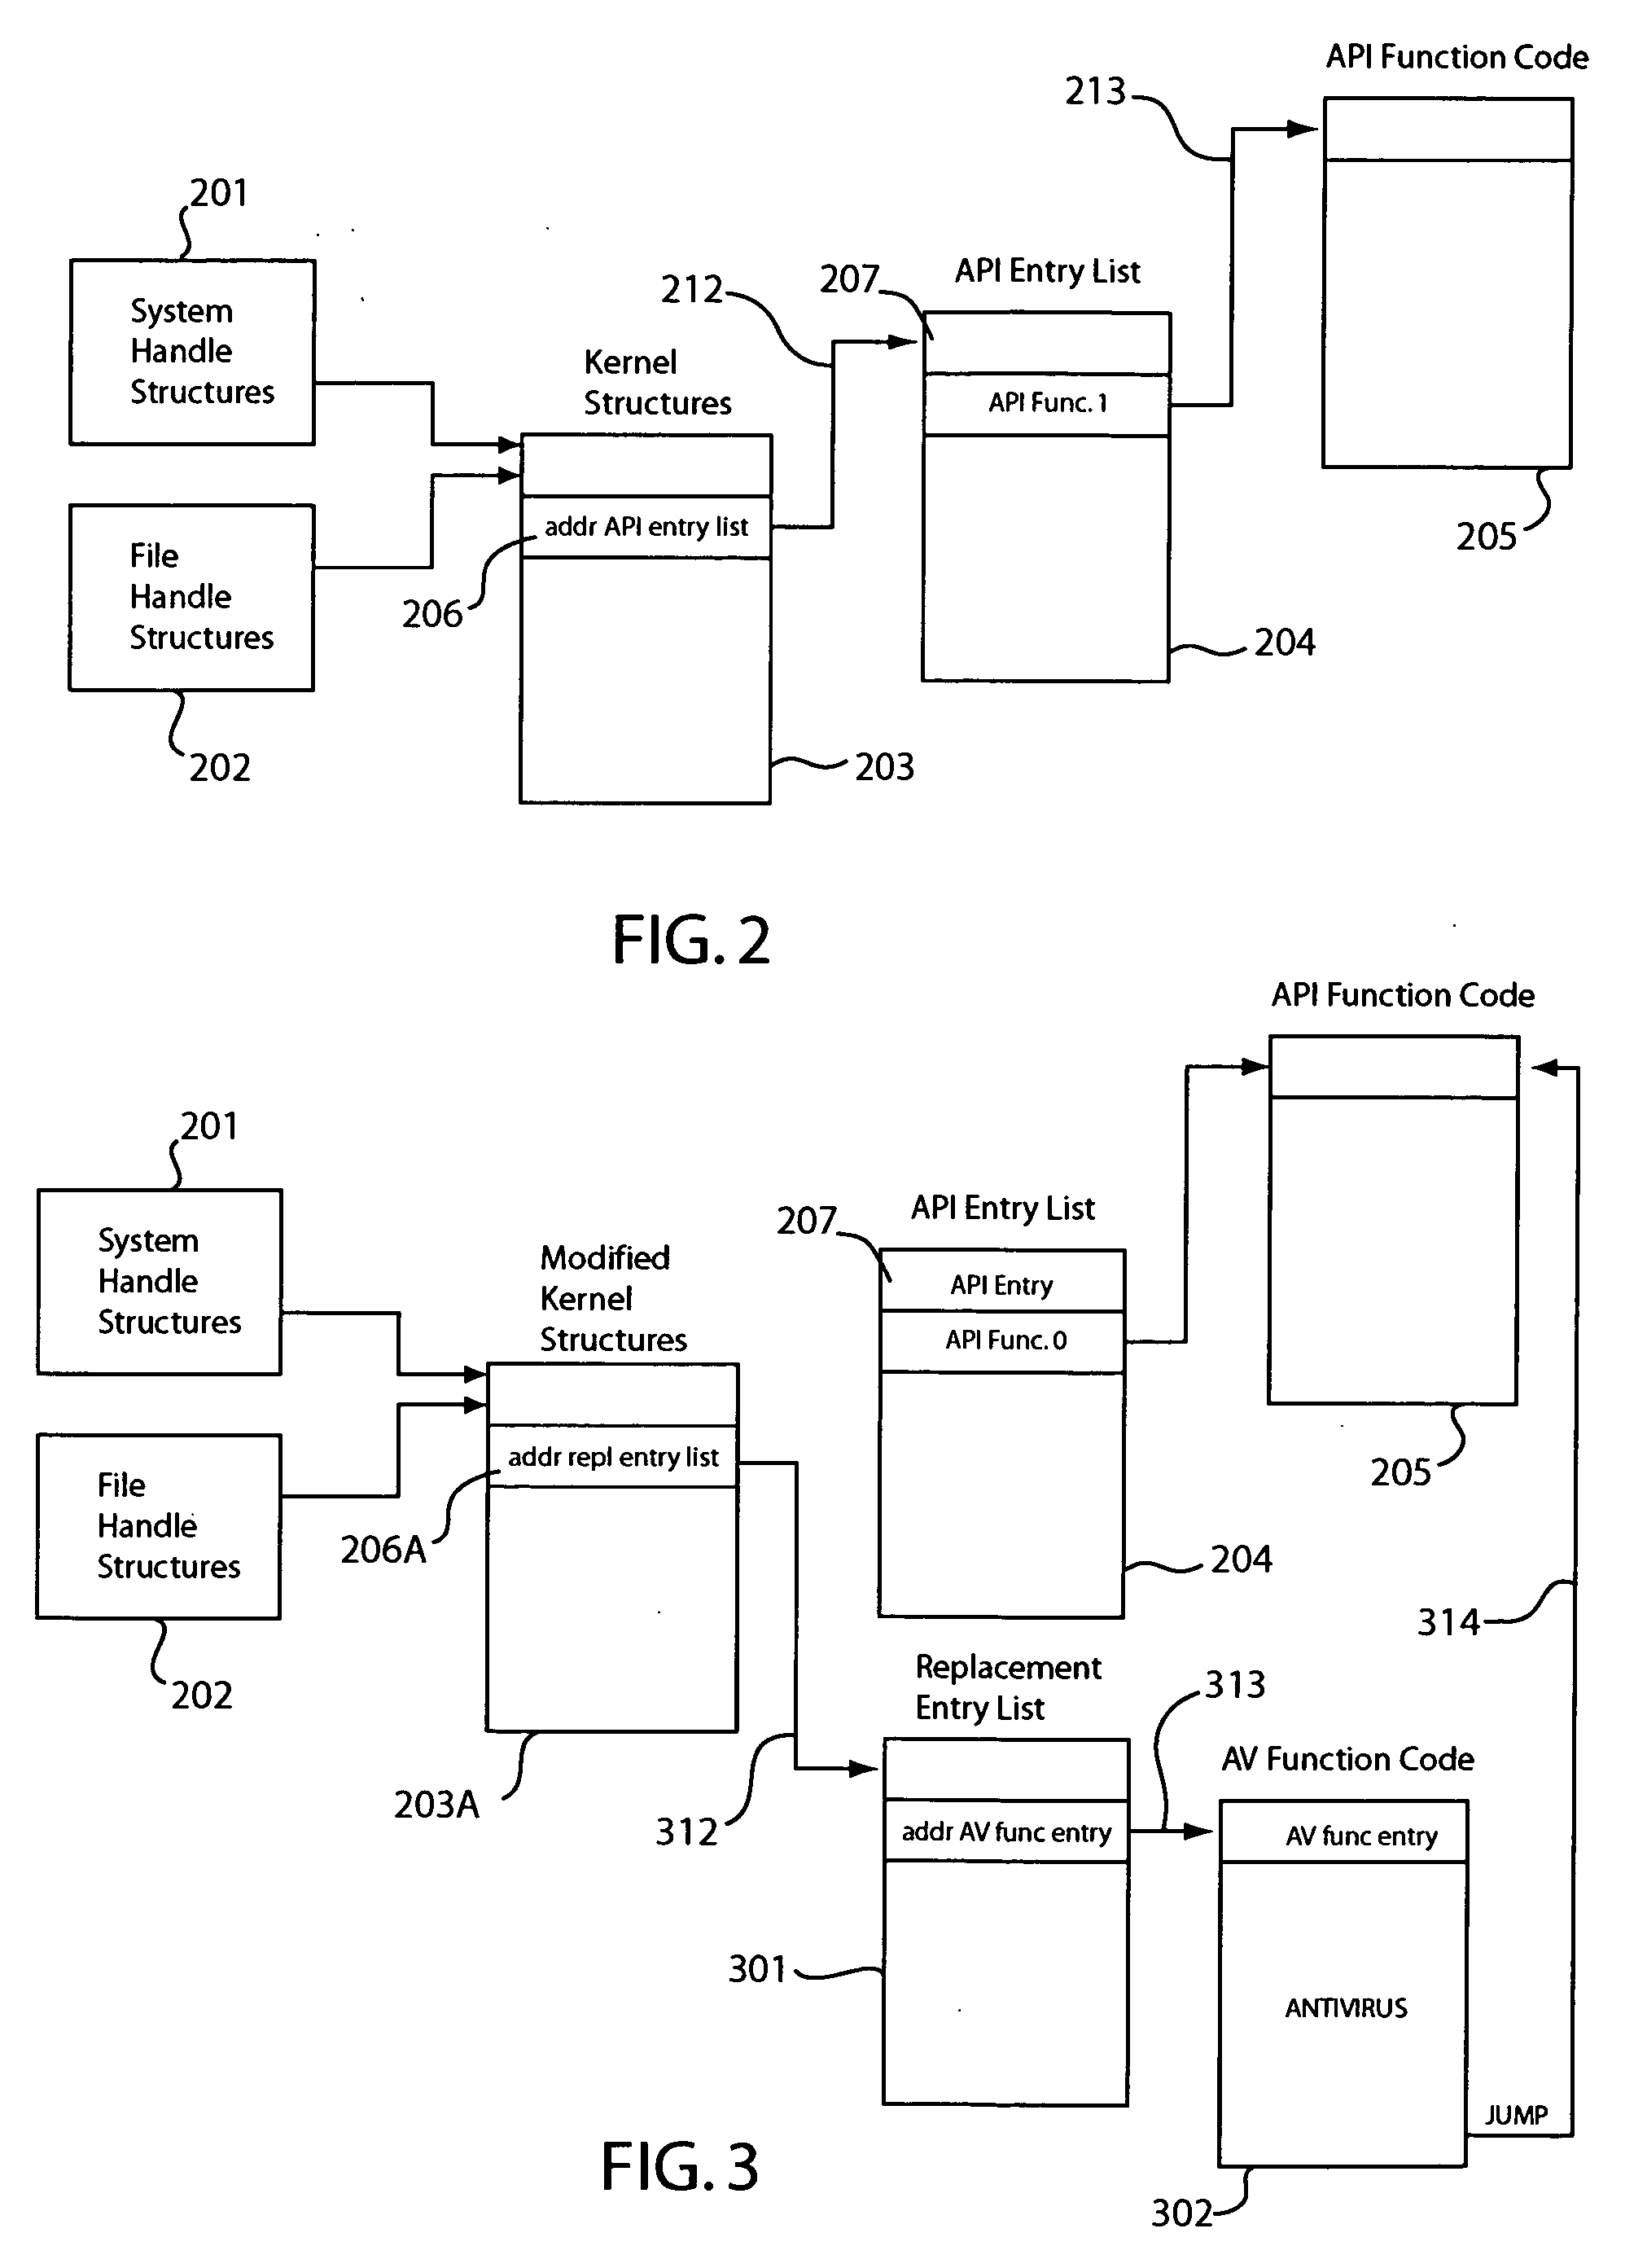 Method and apparatus for performing antivirus tasks in a mobile wireless device